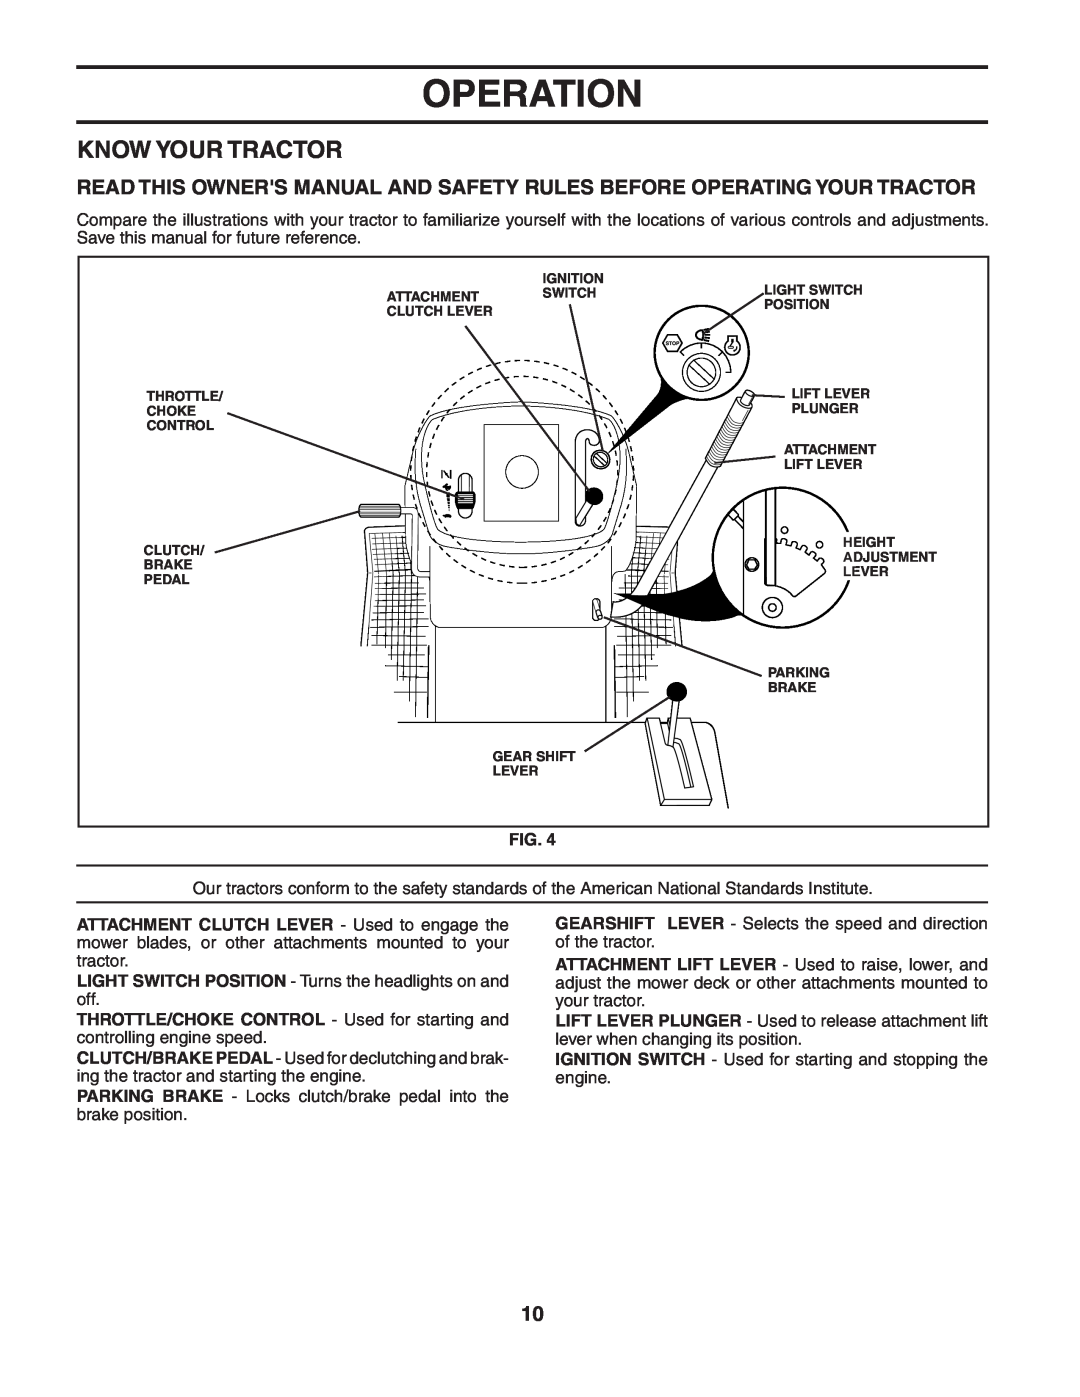 Weed Eater WET2242STB manual Know Your Tractor, Operation 